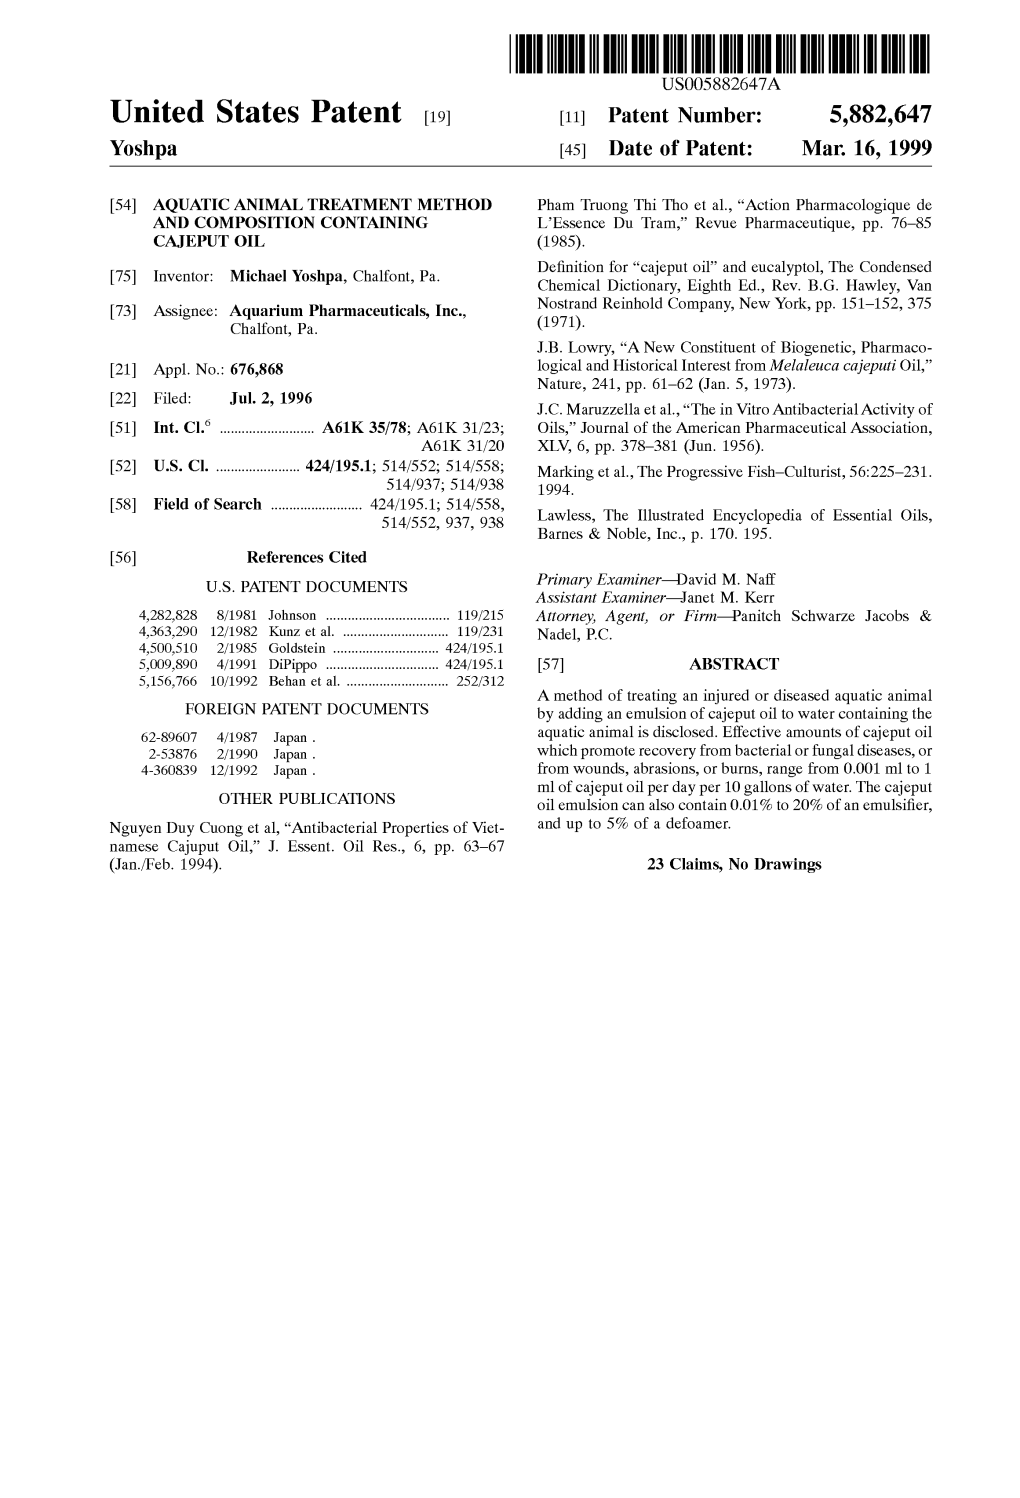 United States Patent (19) 11 Patent Number: 5,882,647 Yoshpa (45) Date of Patent: Mar 16, 1999